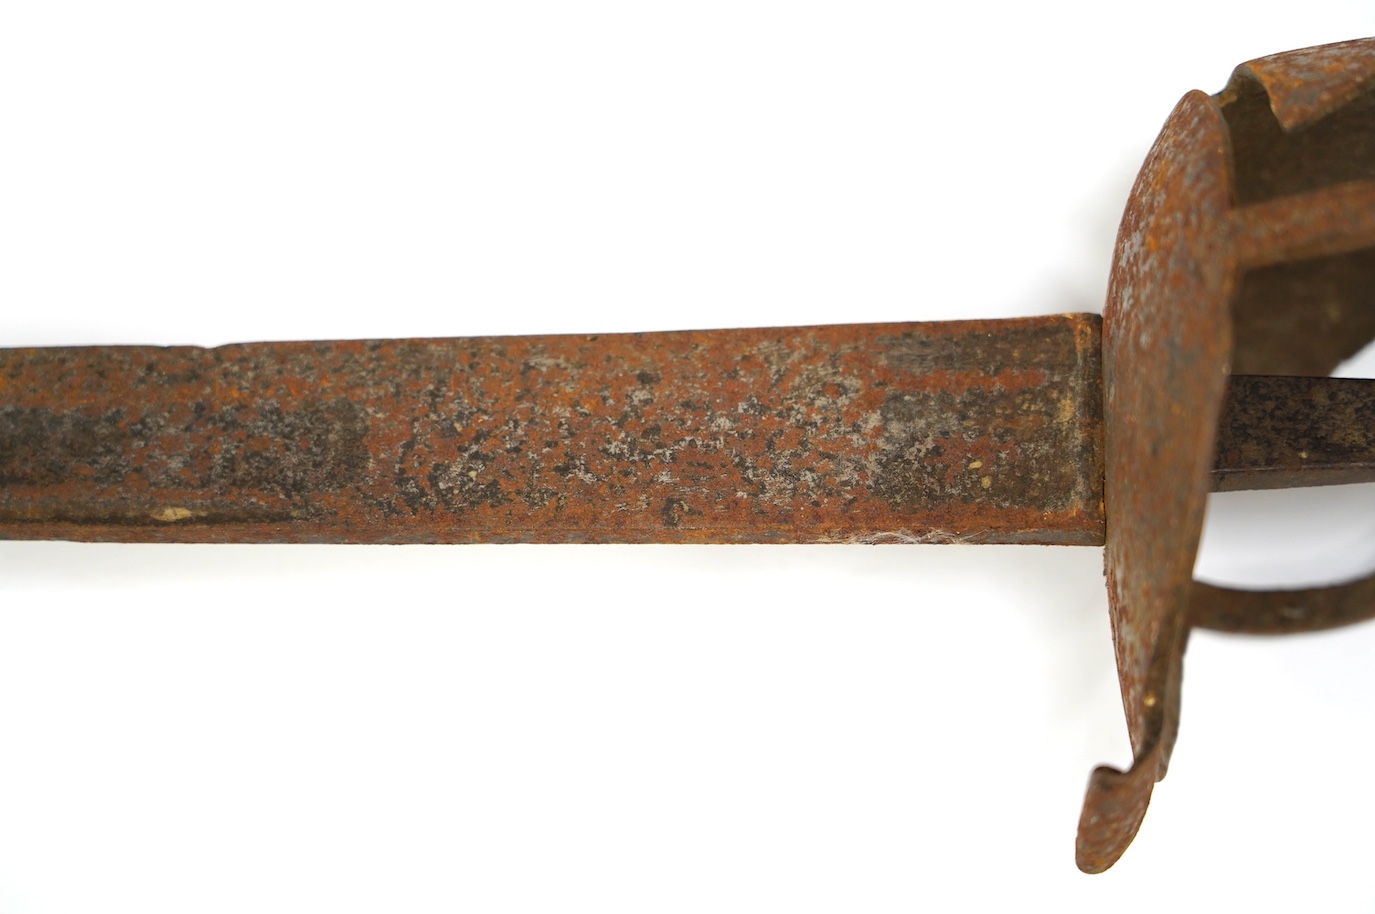 A British cavalry trooper’s sword, c.1750, straight single edged fullered blade, regulation iron hilt, with bun shaped pommel, blade 91.5cm. Condition - fair, rusted overall and grip missing